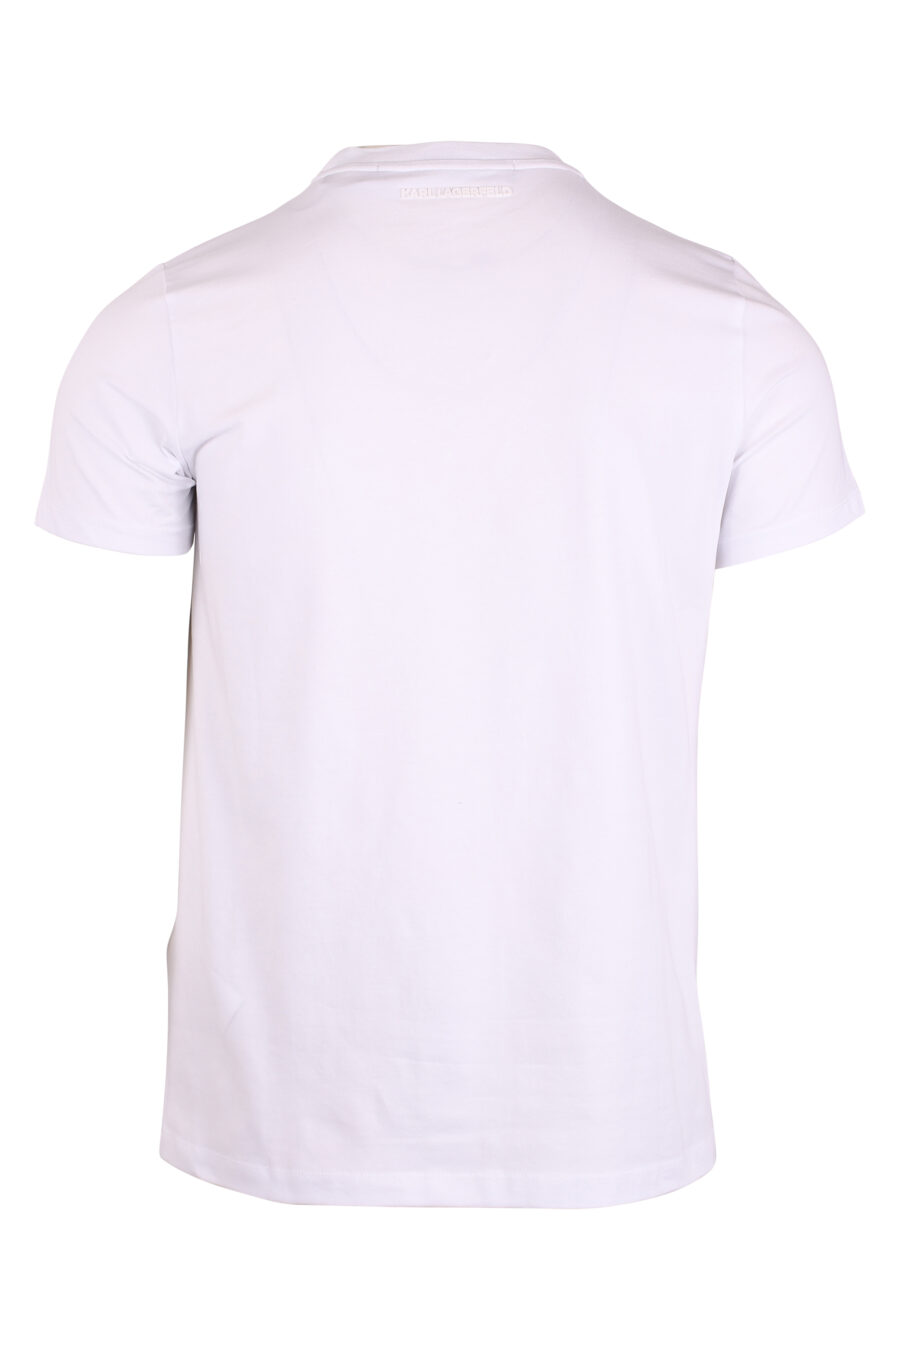 White T-shirt with "rue st-guillaume" rubber logo - IMG 4333